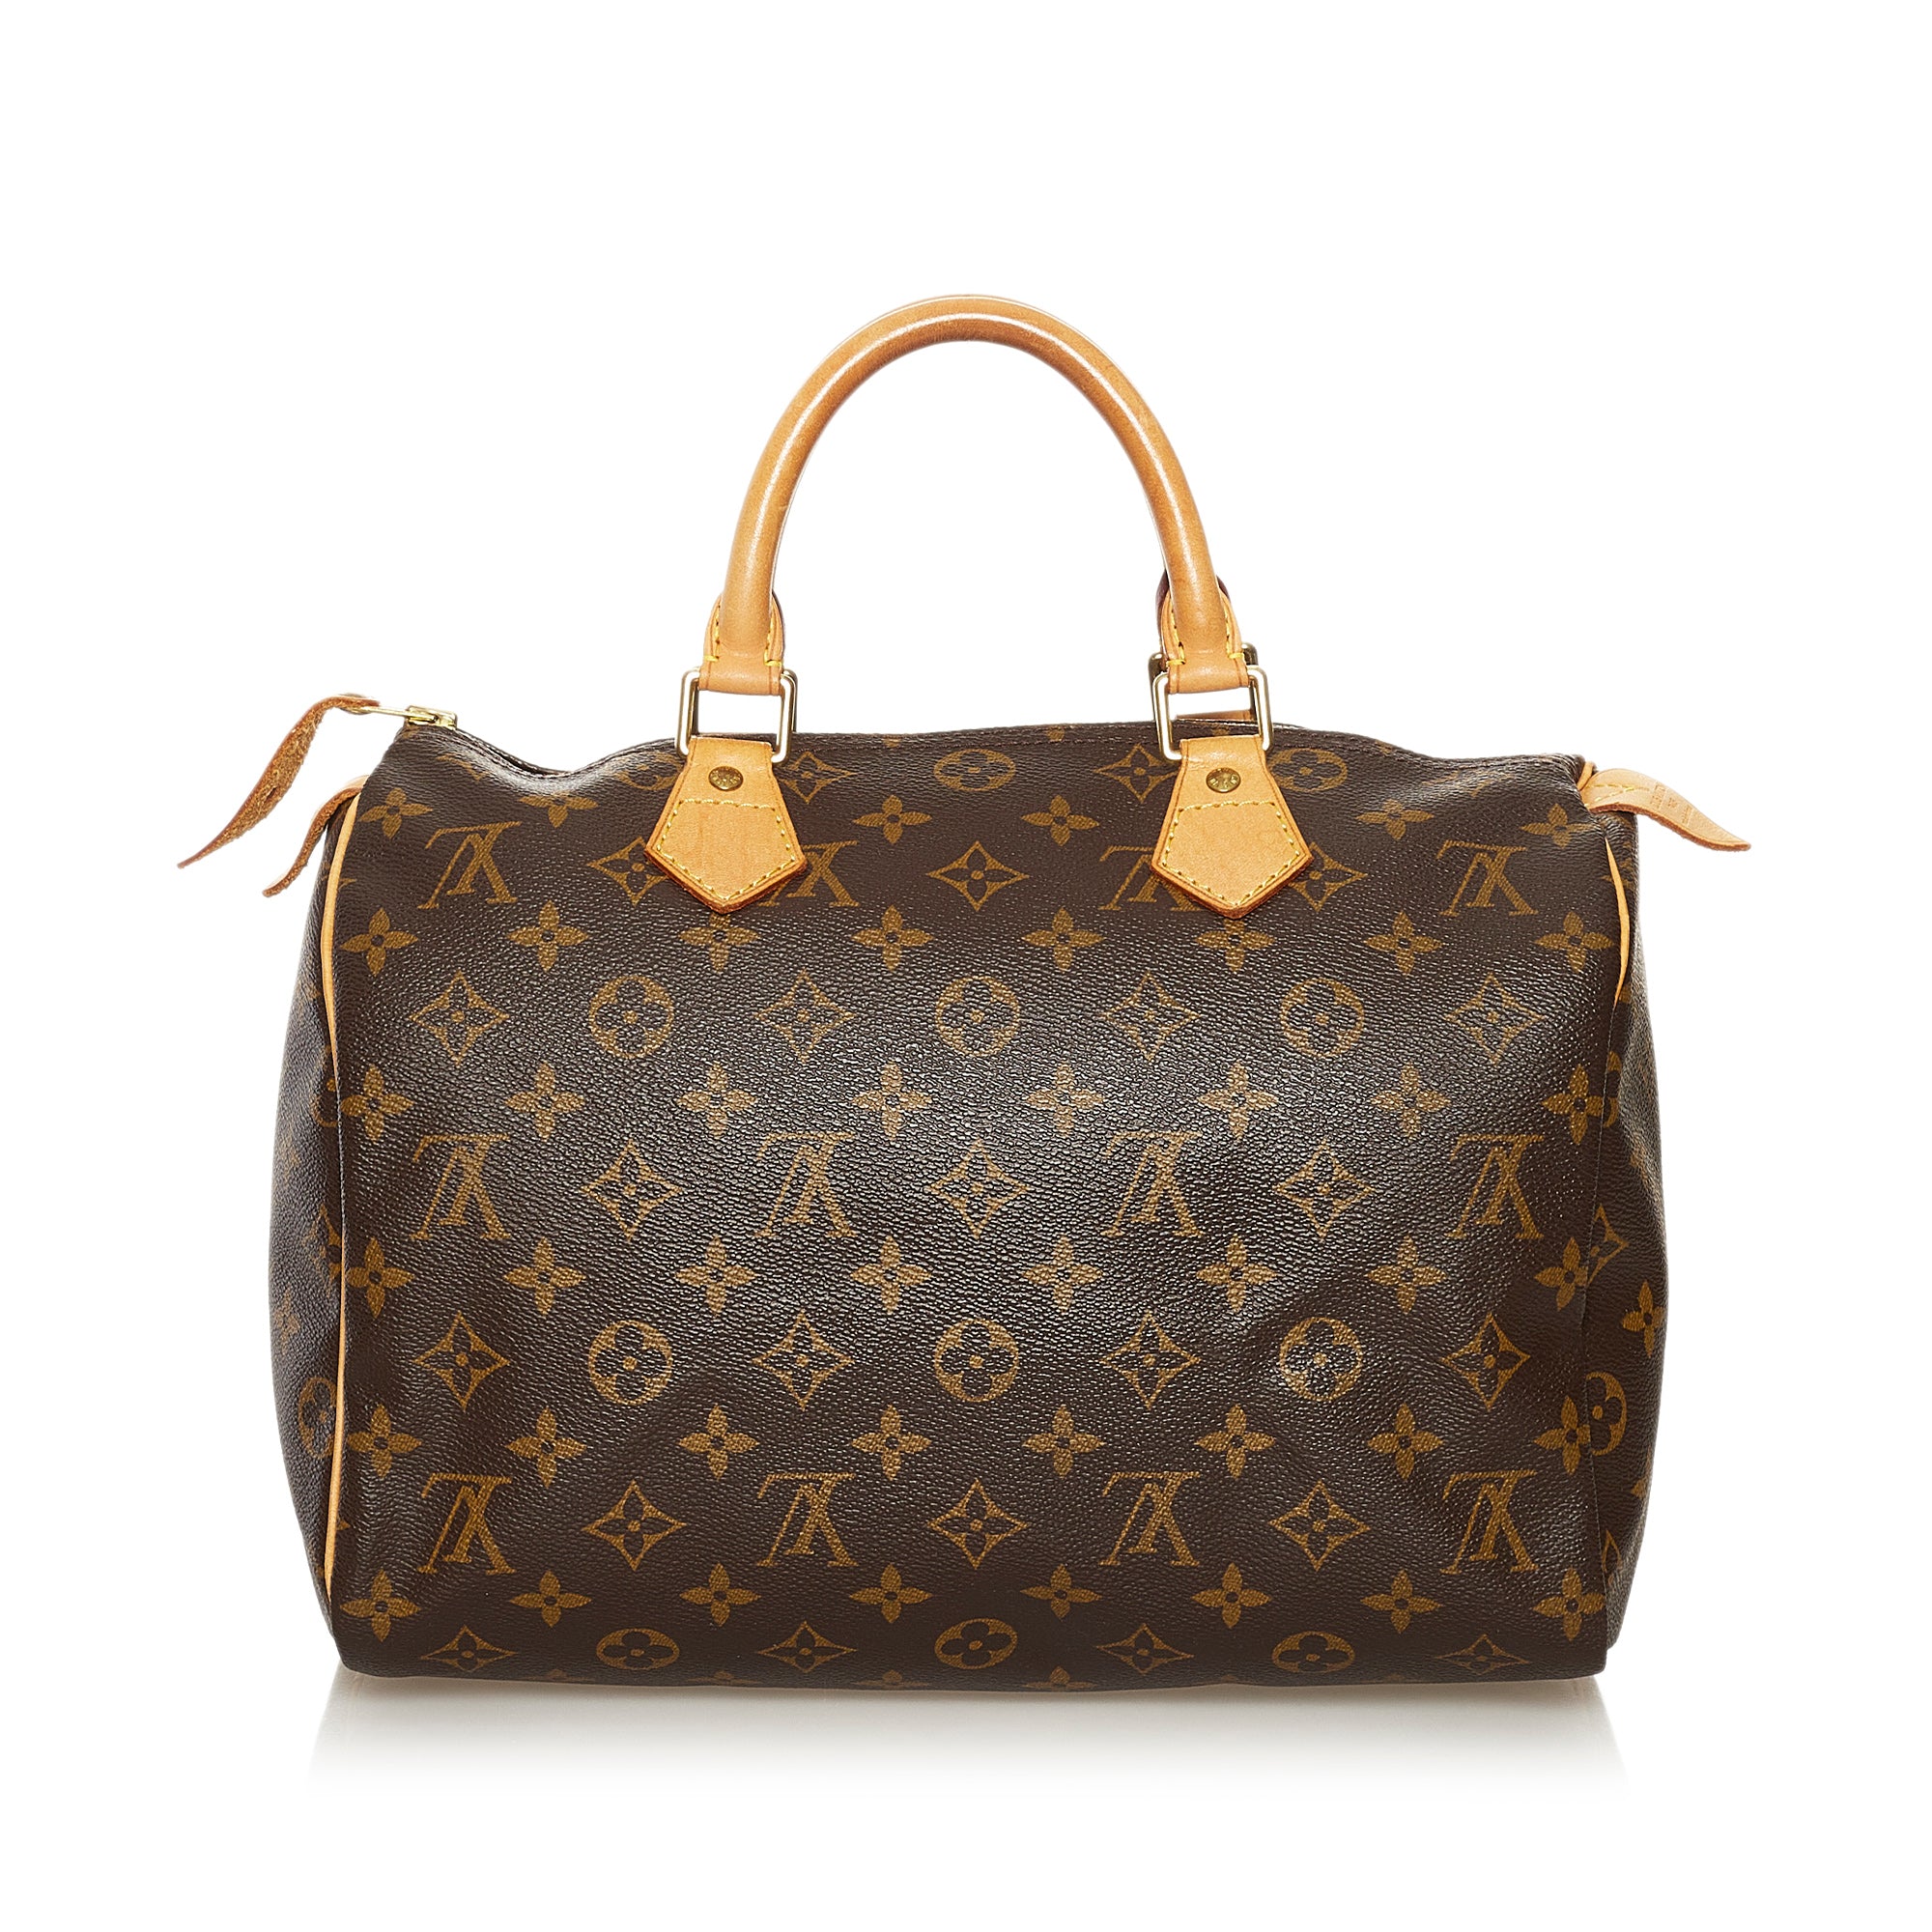 Pre-Owned Louis Vuitton Speedy Bags at DDH - McKinney, TX Patch